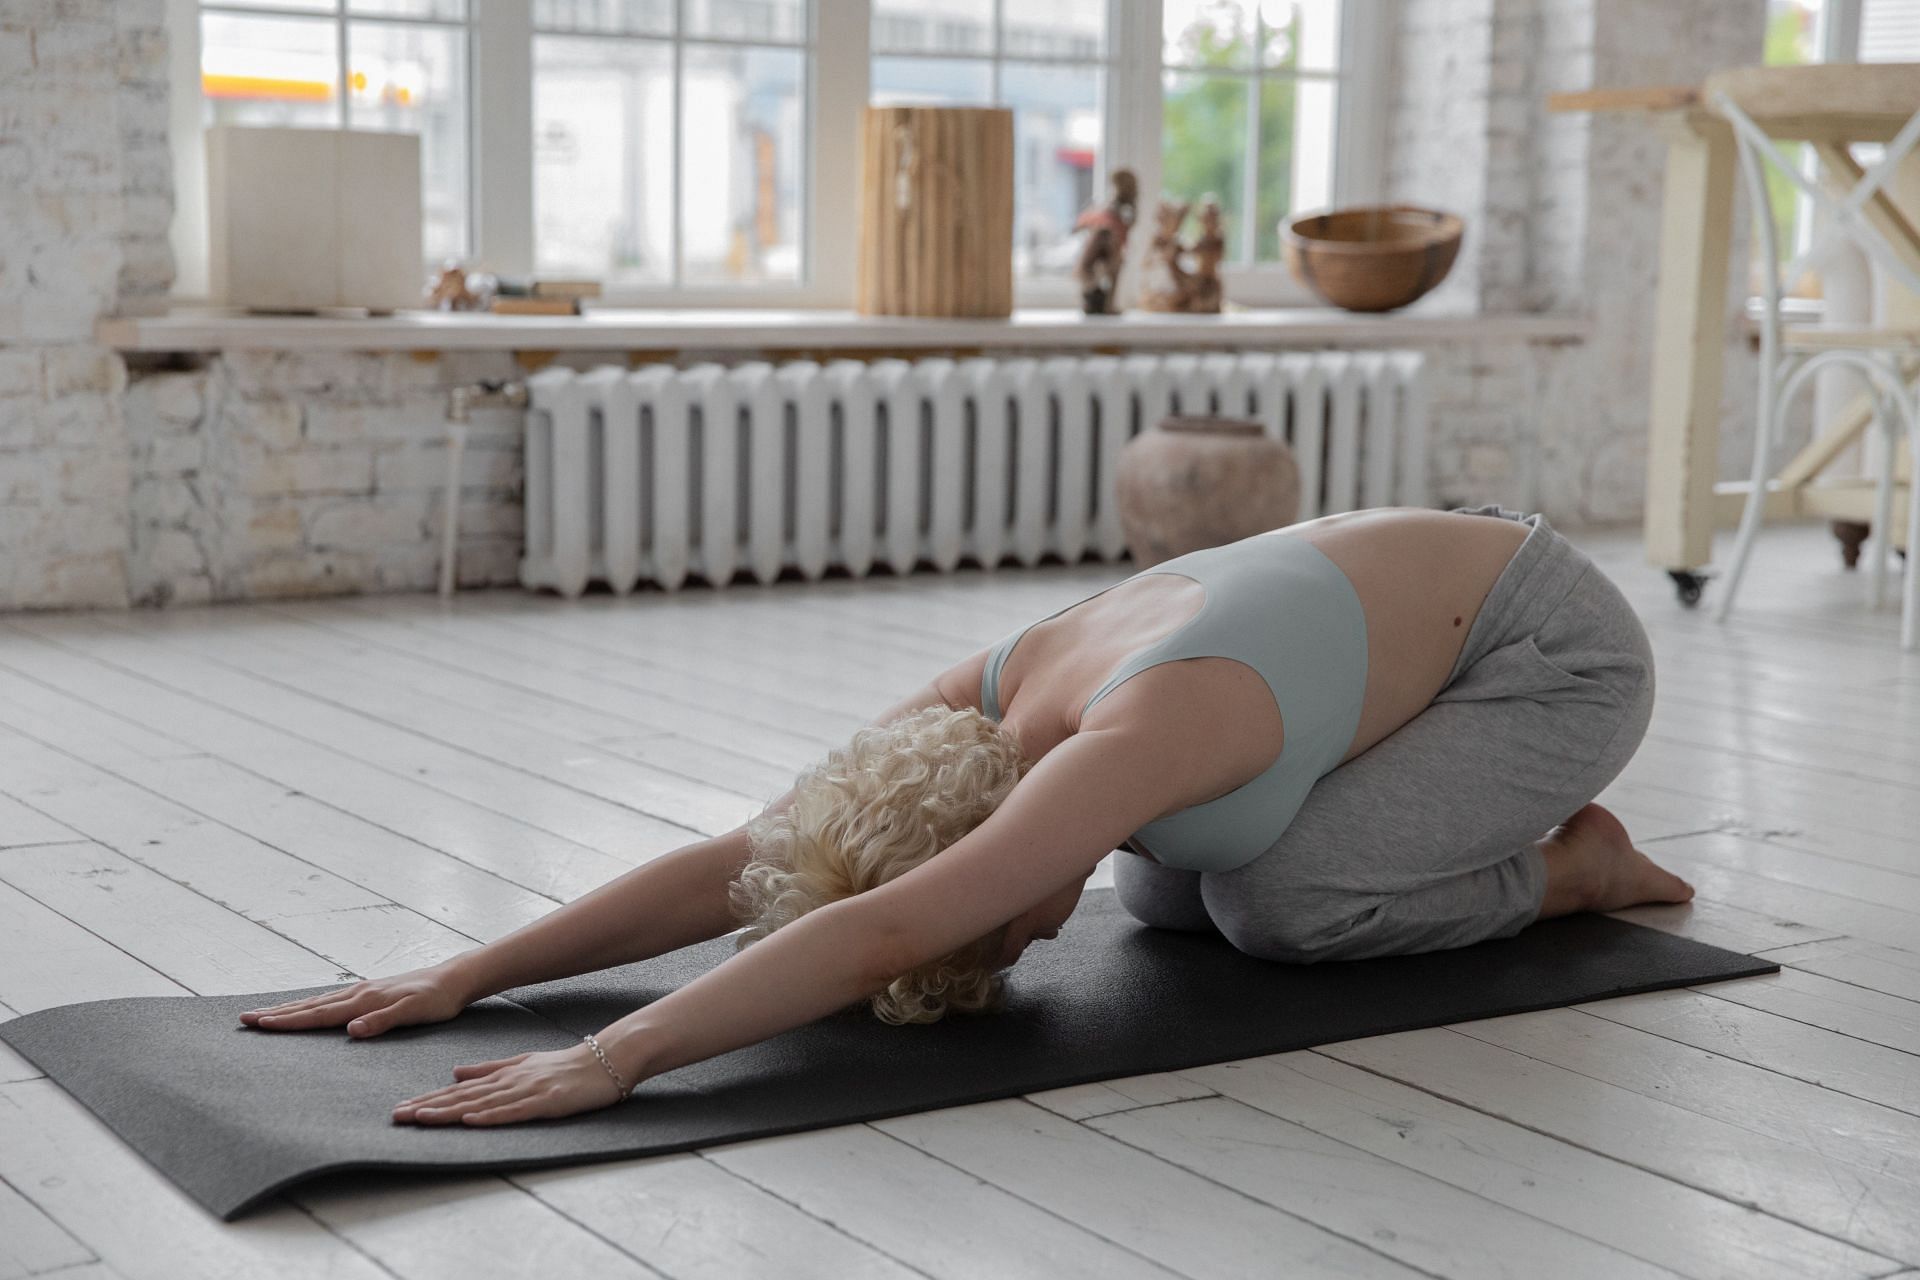 Relax in Balasana for a calming and grounding experience (Image via Pexels/Monstera)